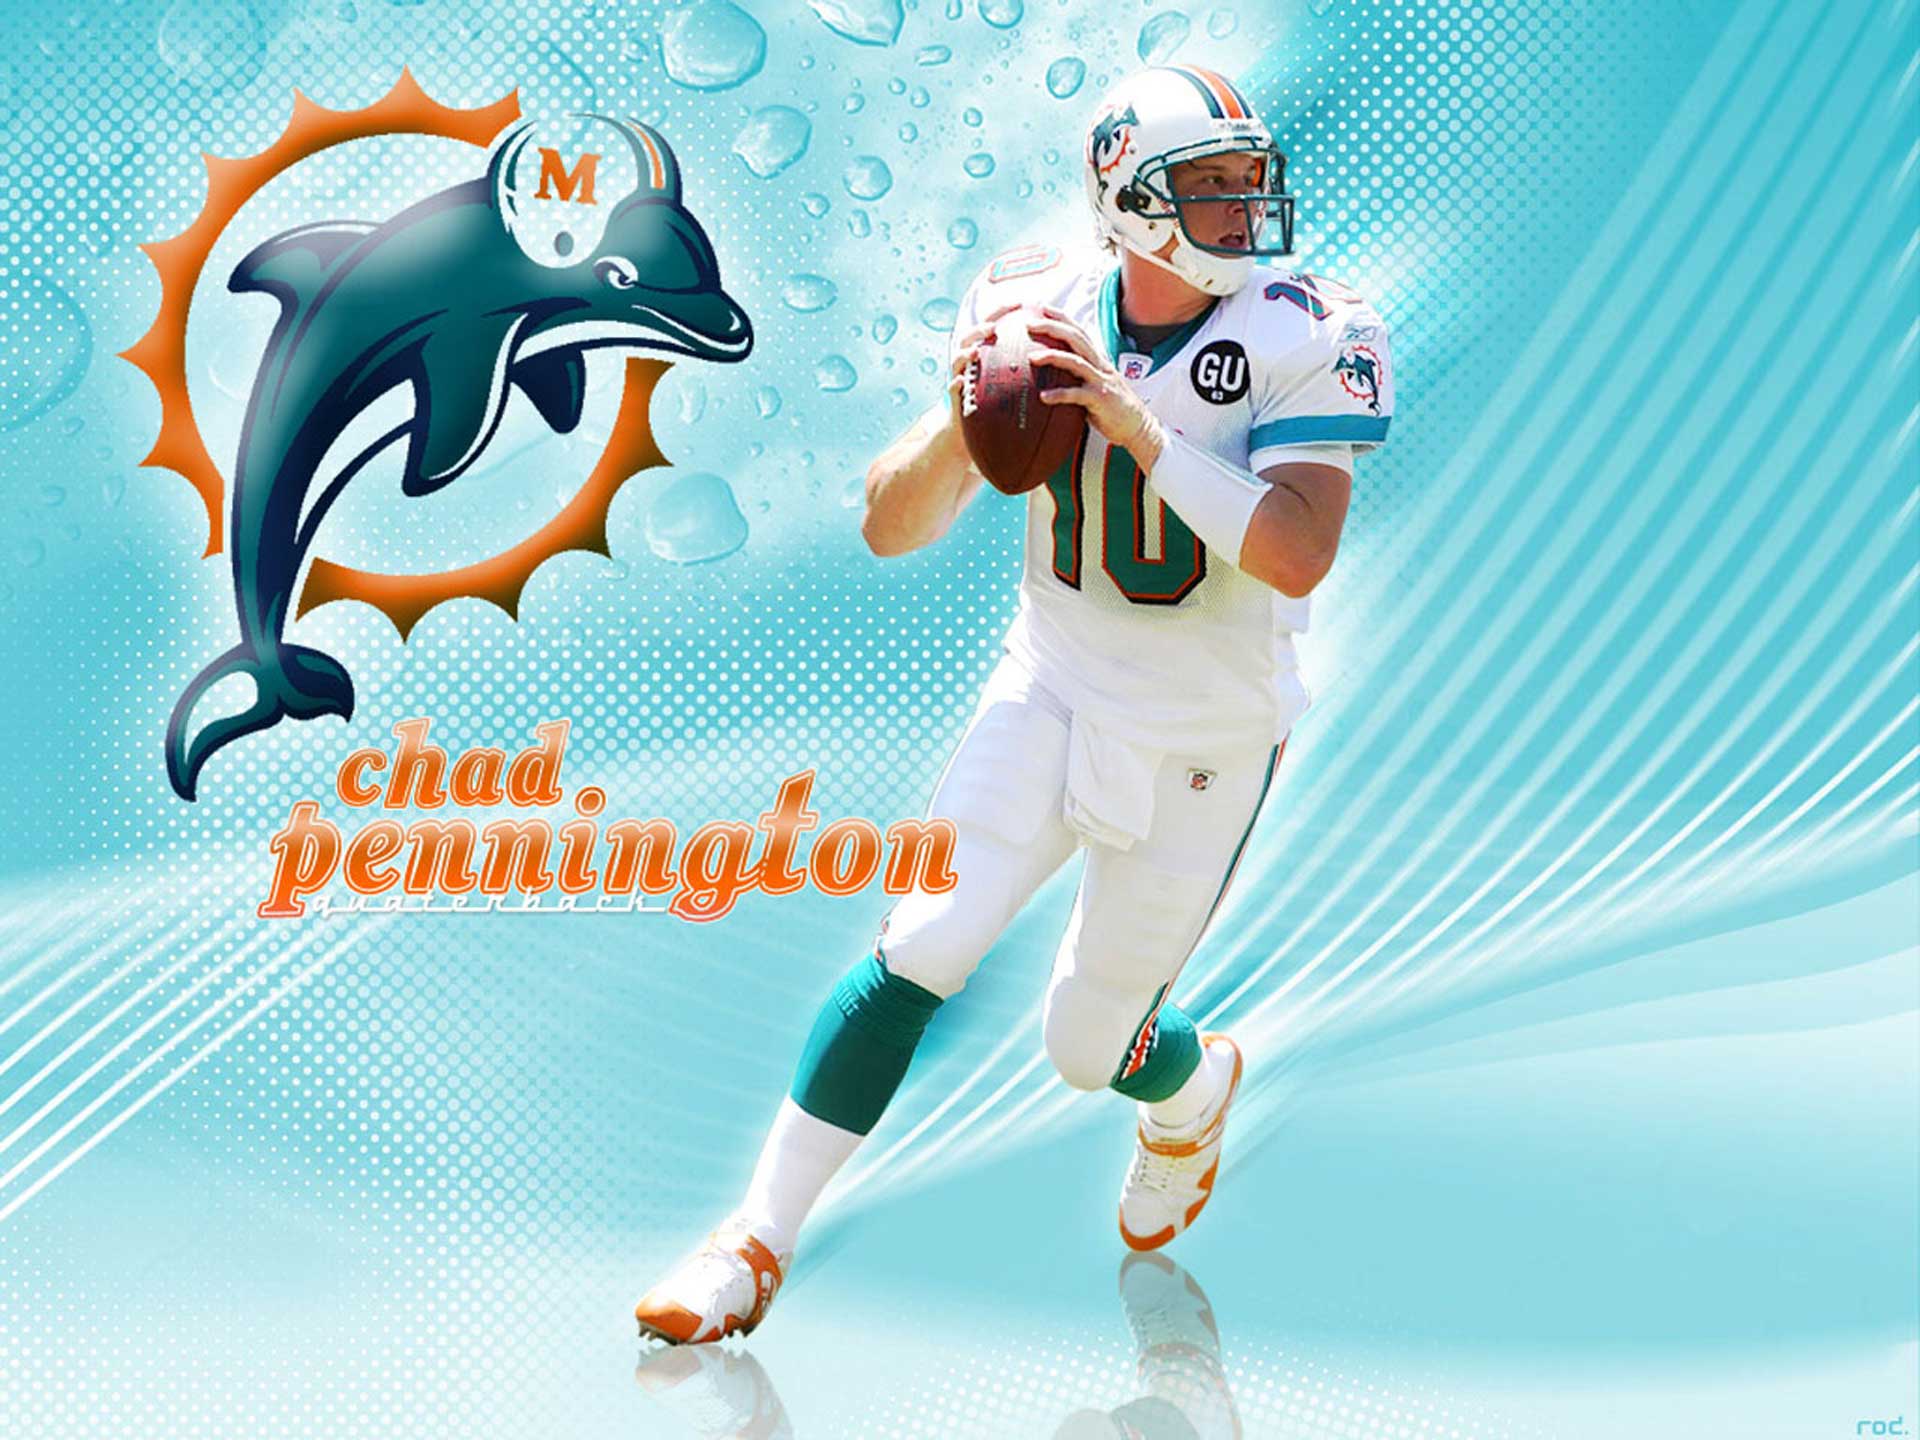 Wallpaper Of The Day: Miami Dolphins | Miami Dolphins Wallpapers ...